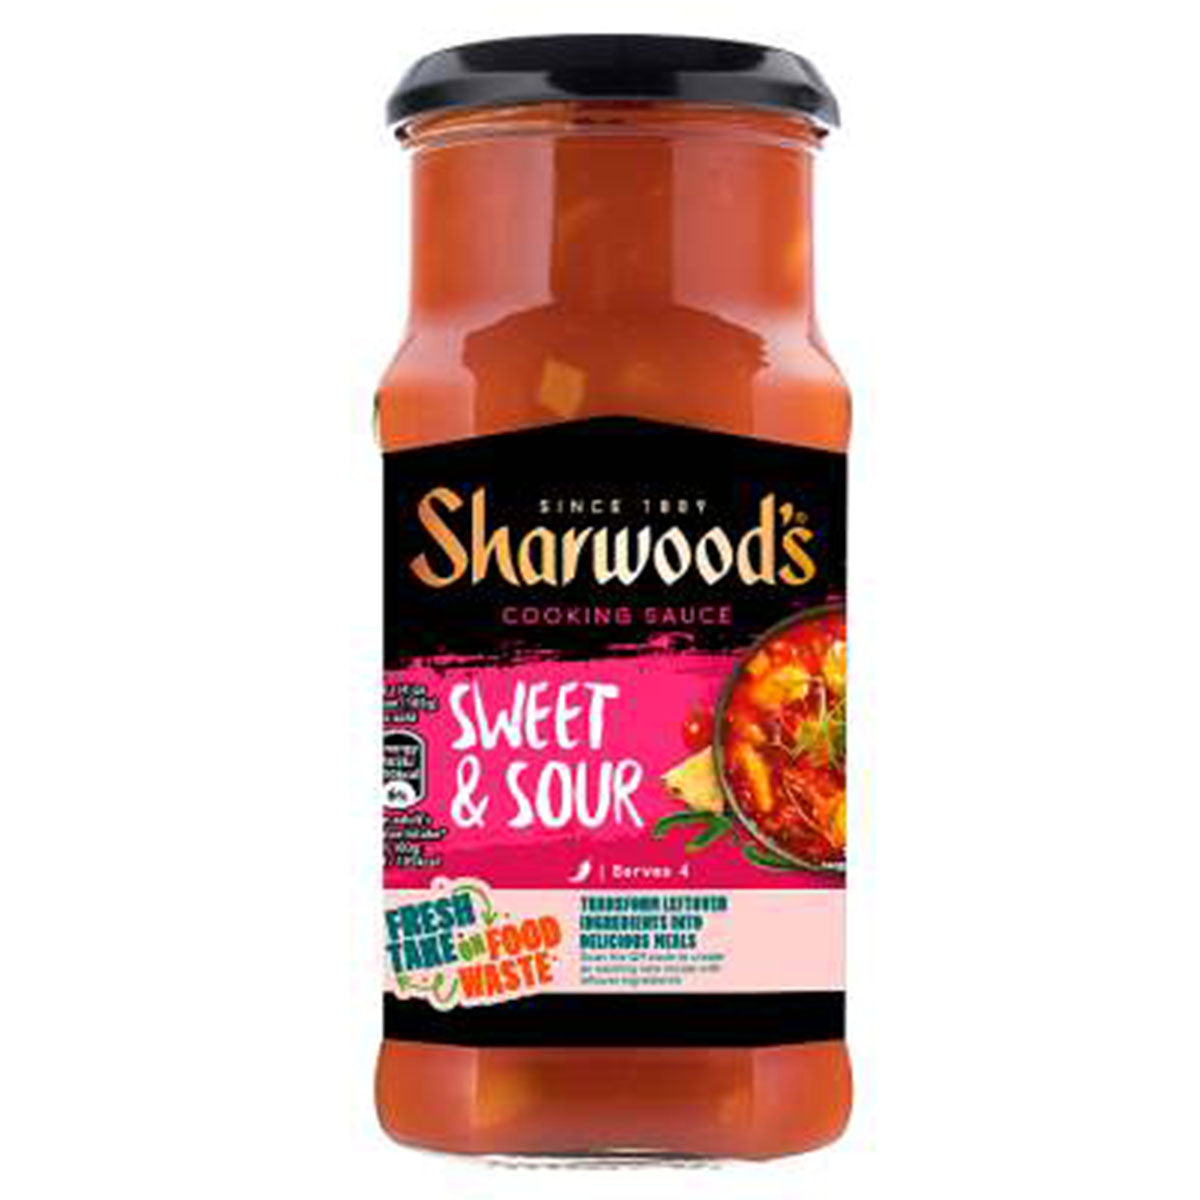 Sharwood's - Cooking Sauce Sweet & Sour - 425g - Continental Food Store